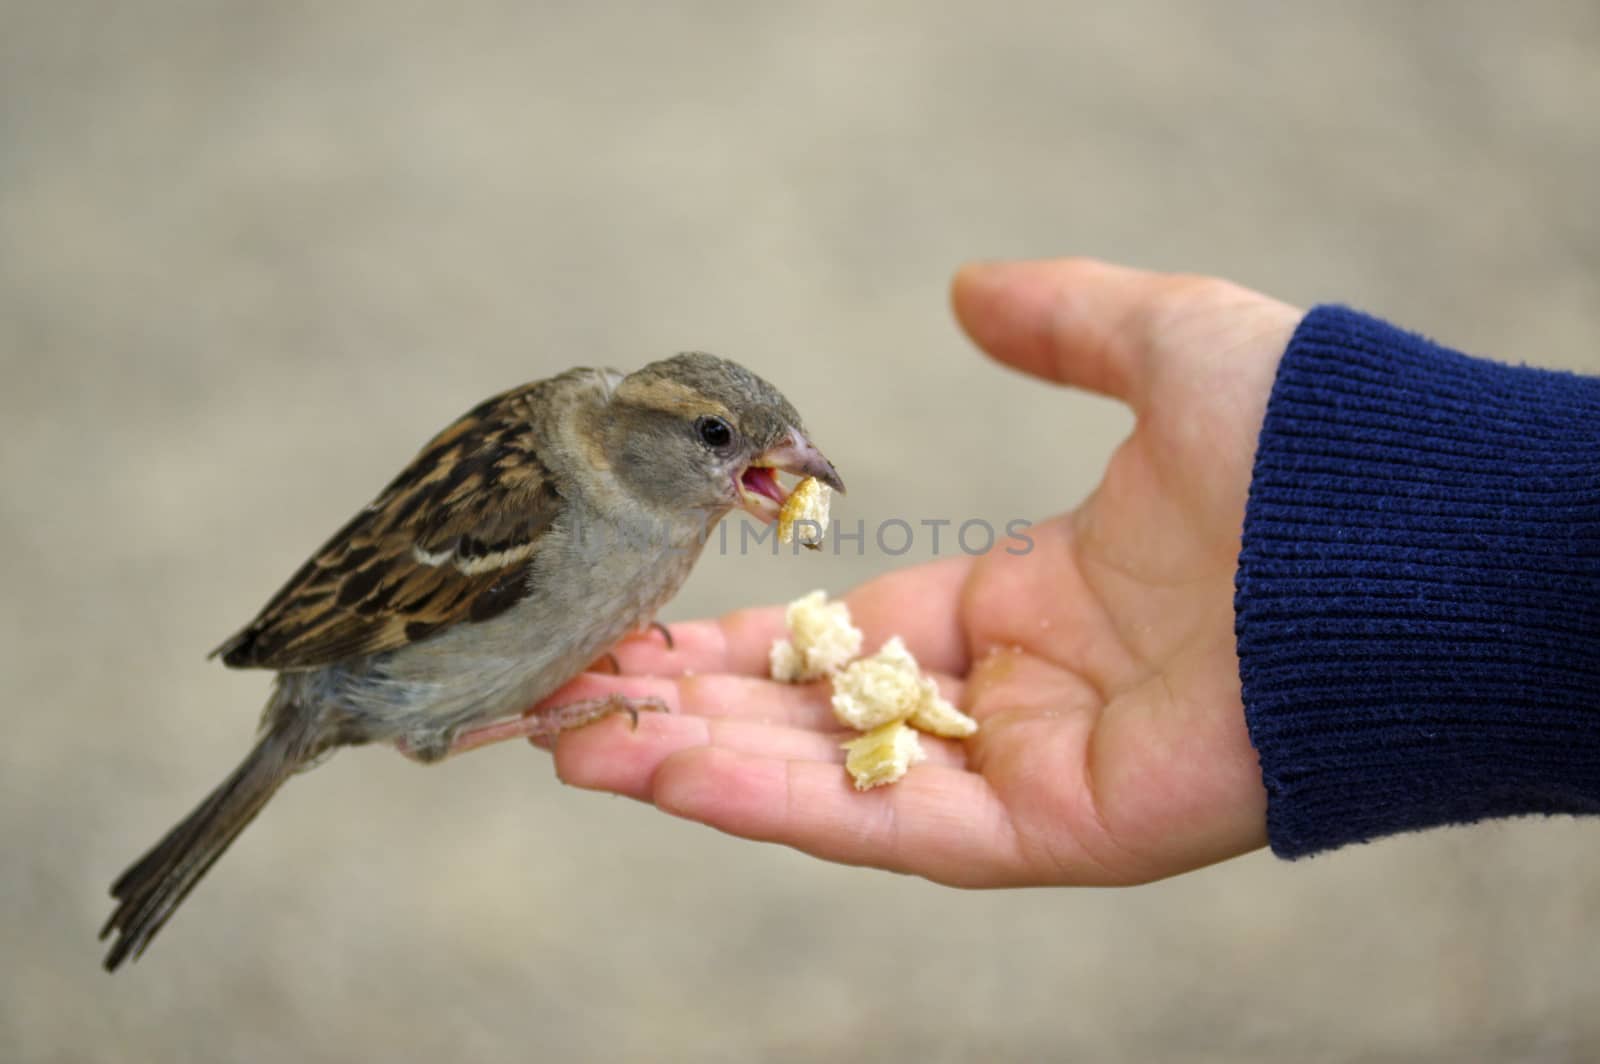 a sparrow bird eating bread from outstretched hand